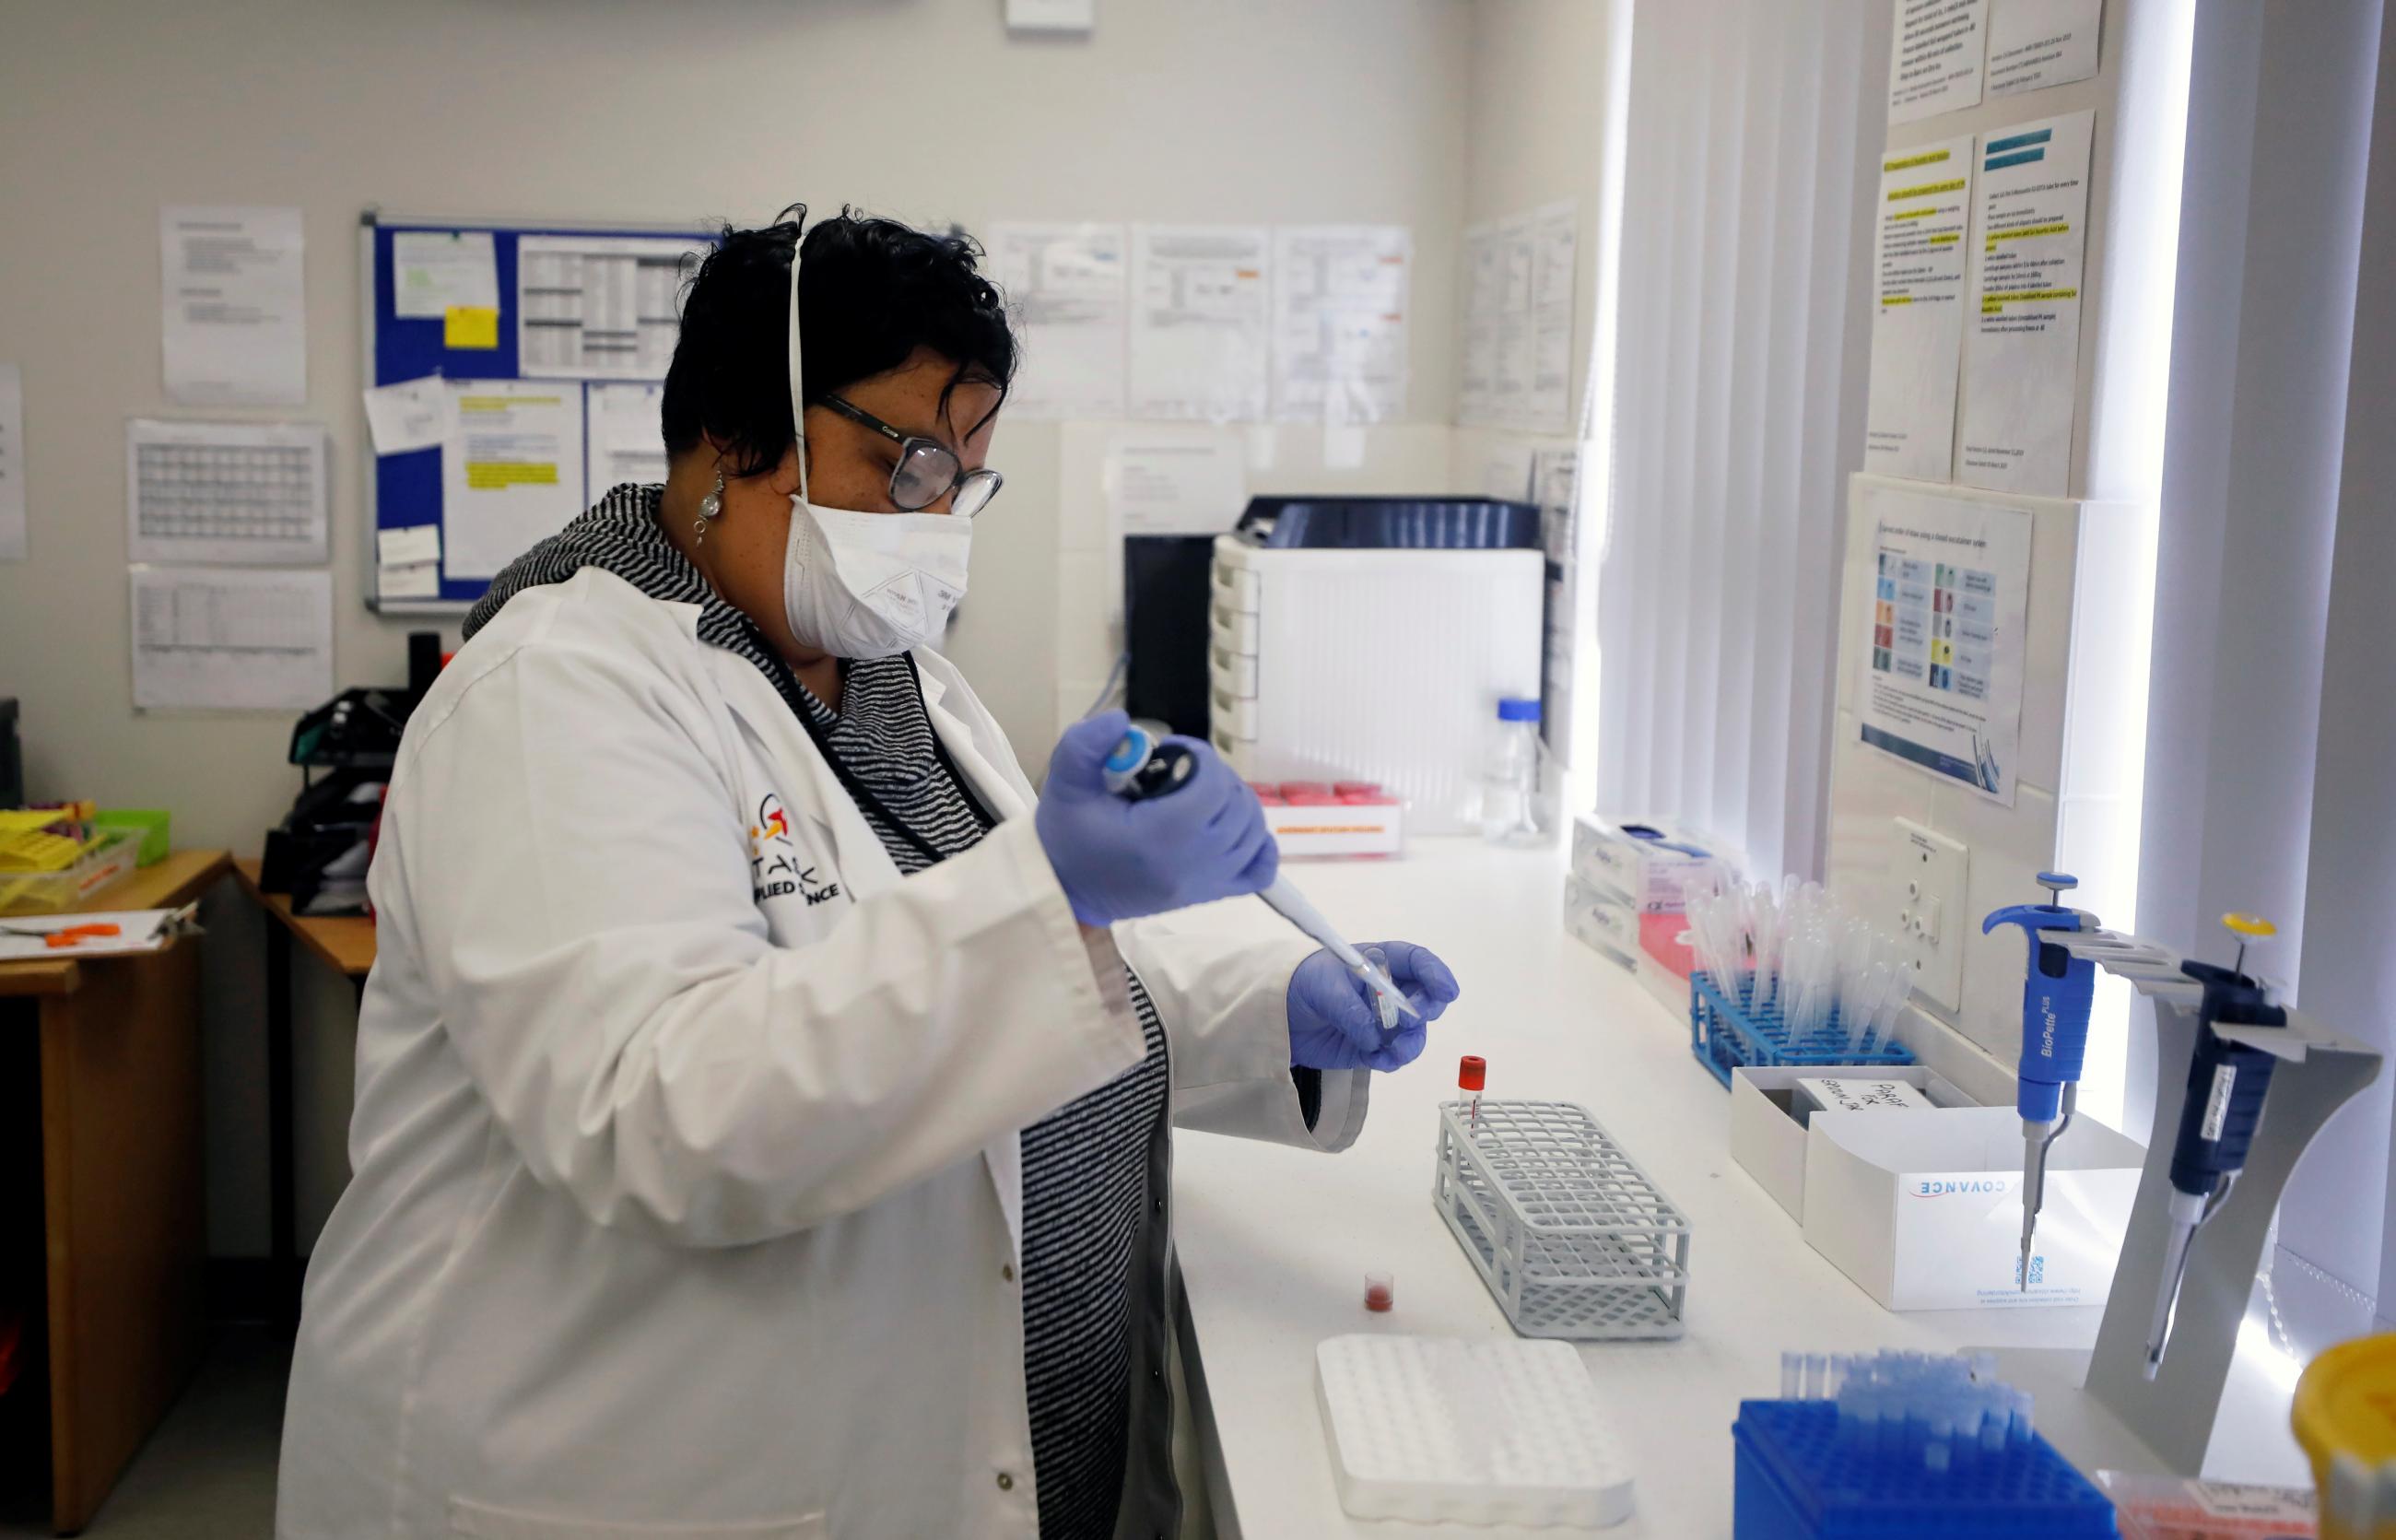 A medical researcher studying the BCG vaccine for tuberculosis examines test samples in a laboratory.